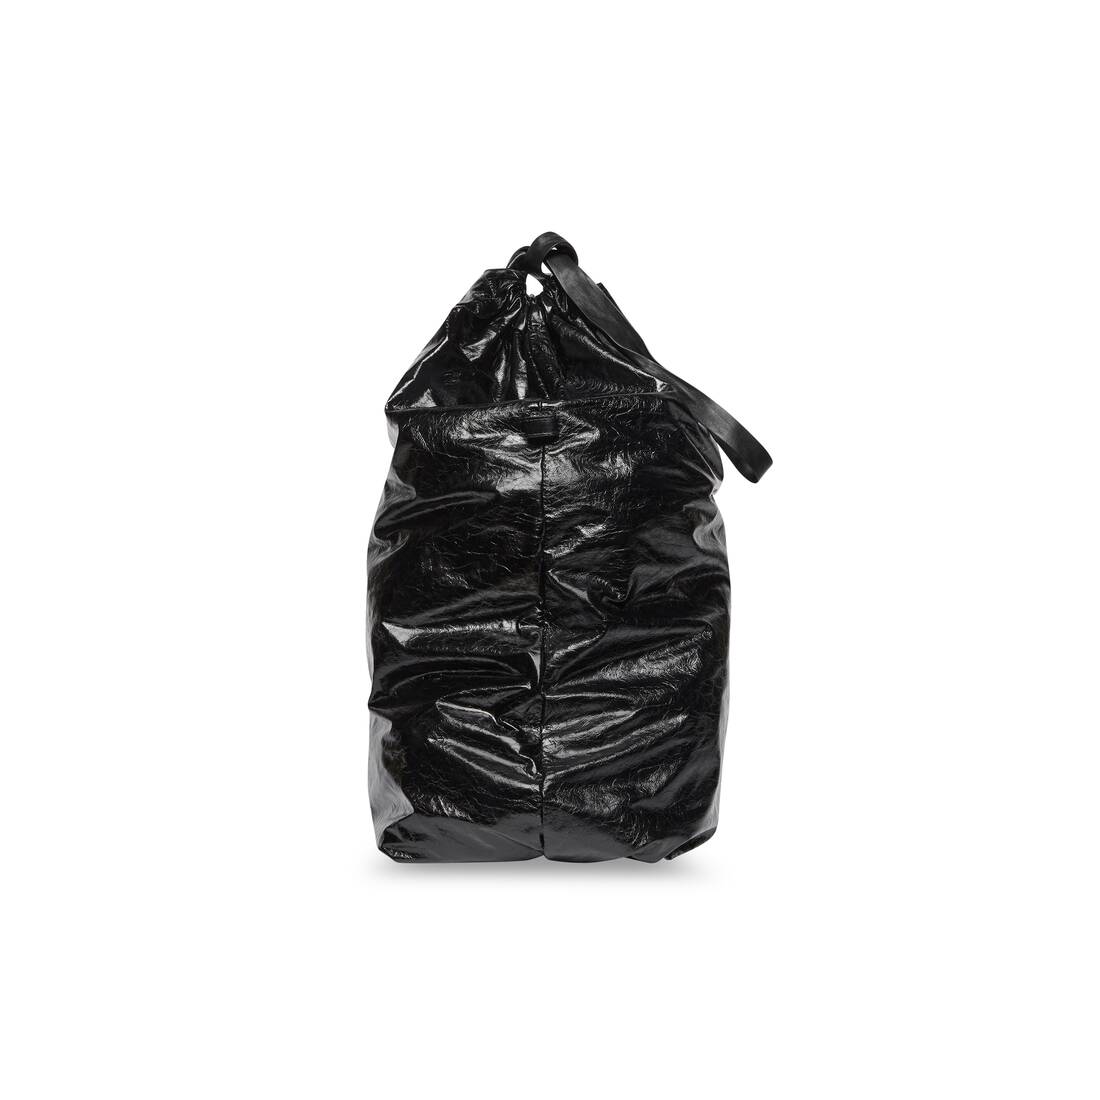 I recreated Kim Kardashian's $1,700 Balenciaga 'garbage bag' for $1.65 and  people laughed at me on the street